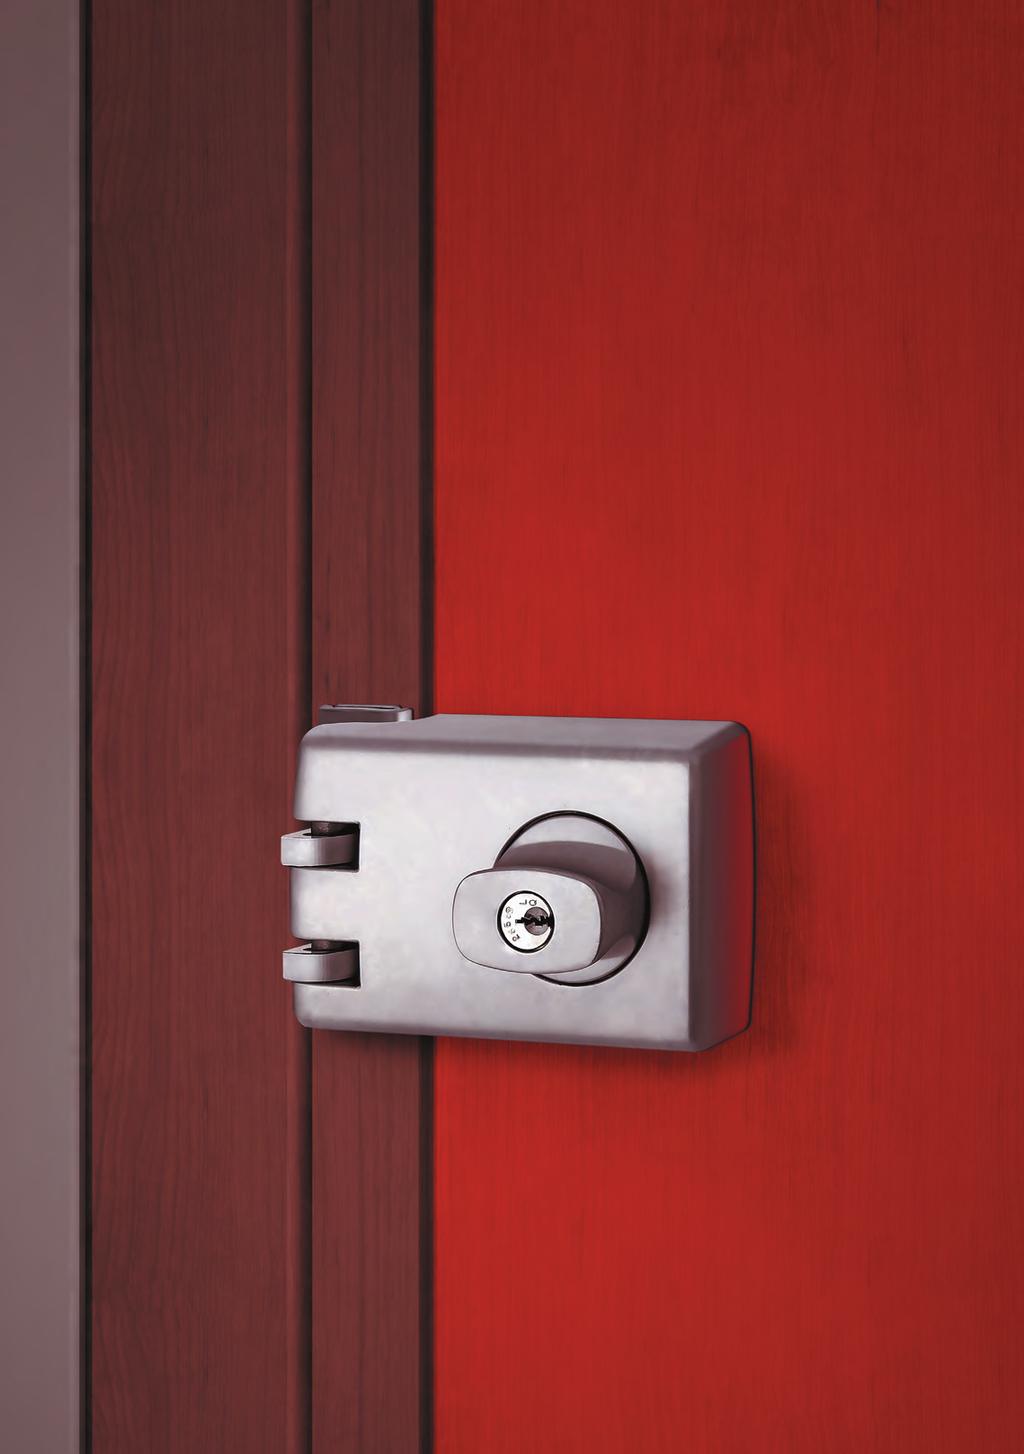 355 Deadlock The top security Features provided by the 355 Deadlock make it an ideal lockset for both domestic and commercial applications.